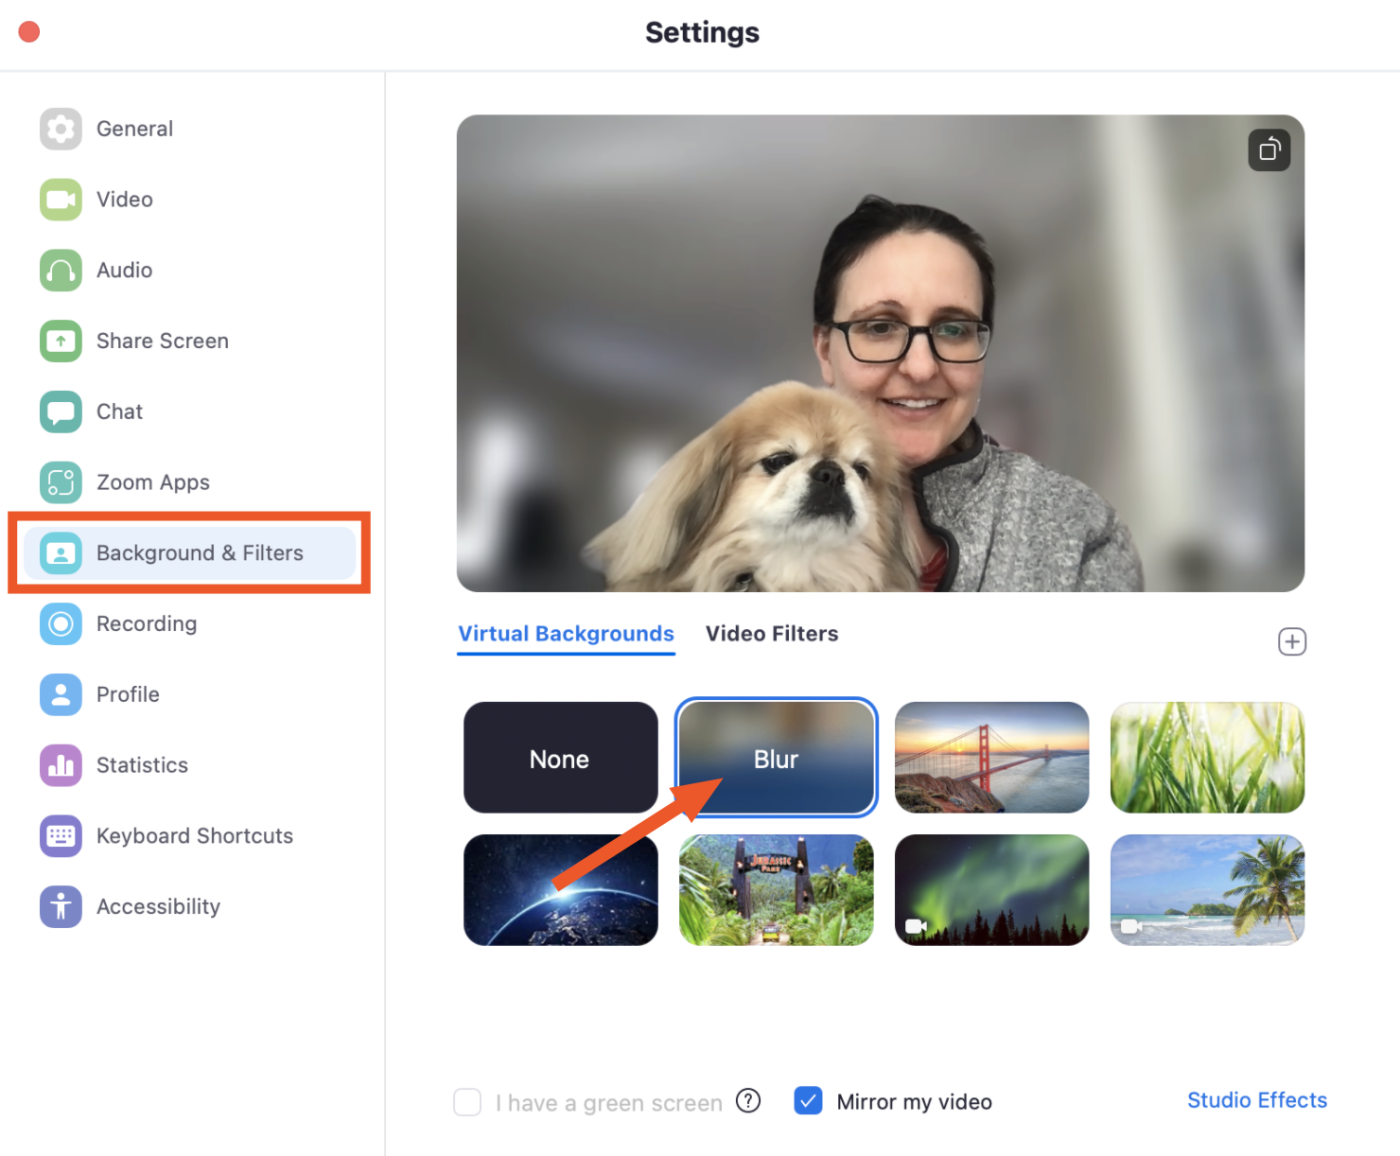 How to blur your background in Zoom: click Background & Filters, then Blur (from the Settings)